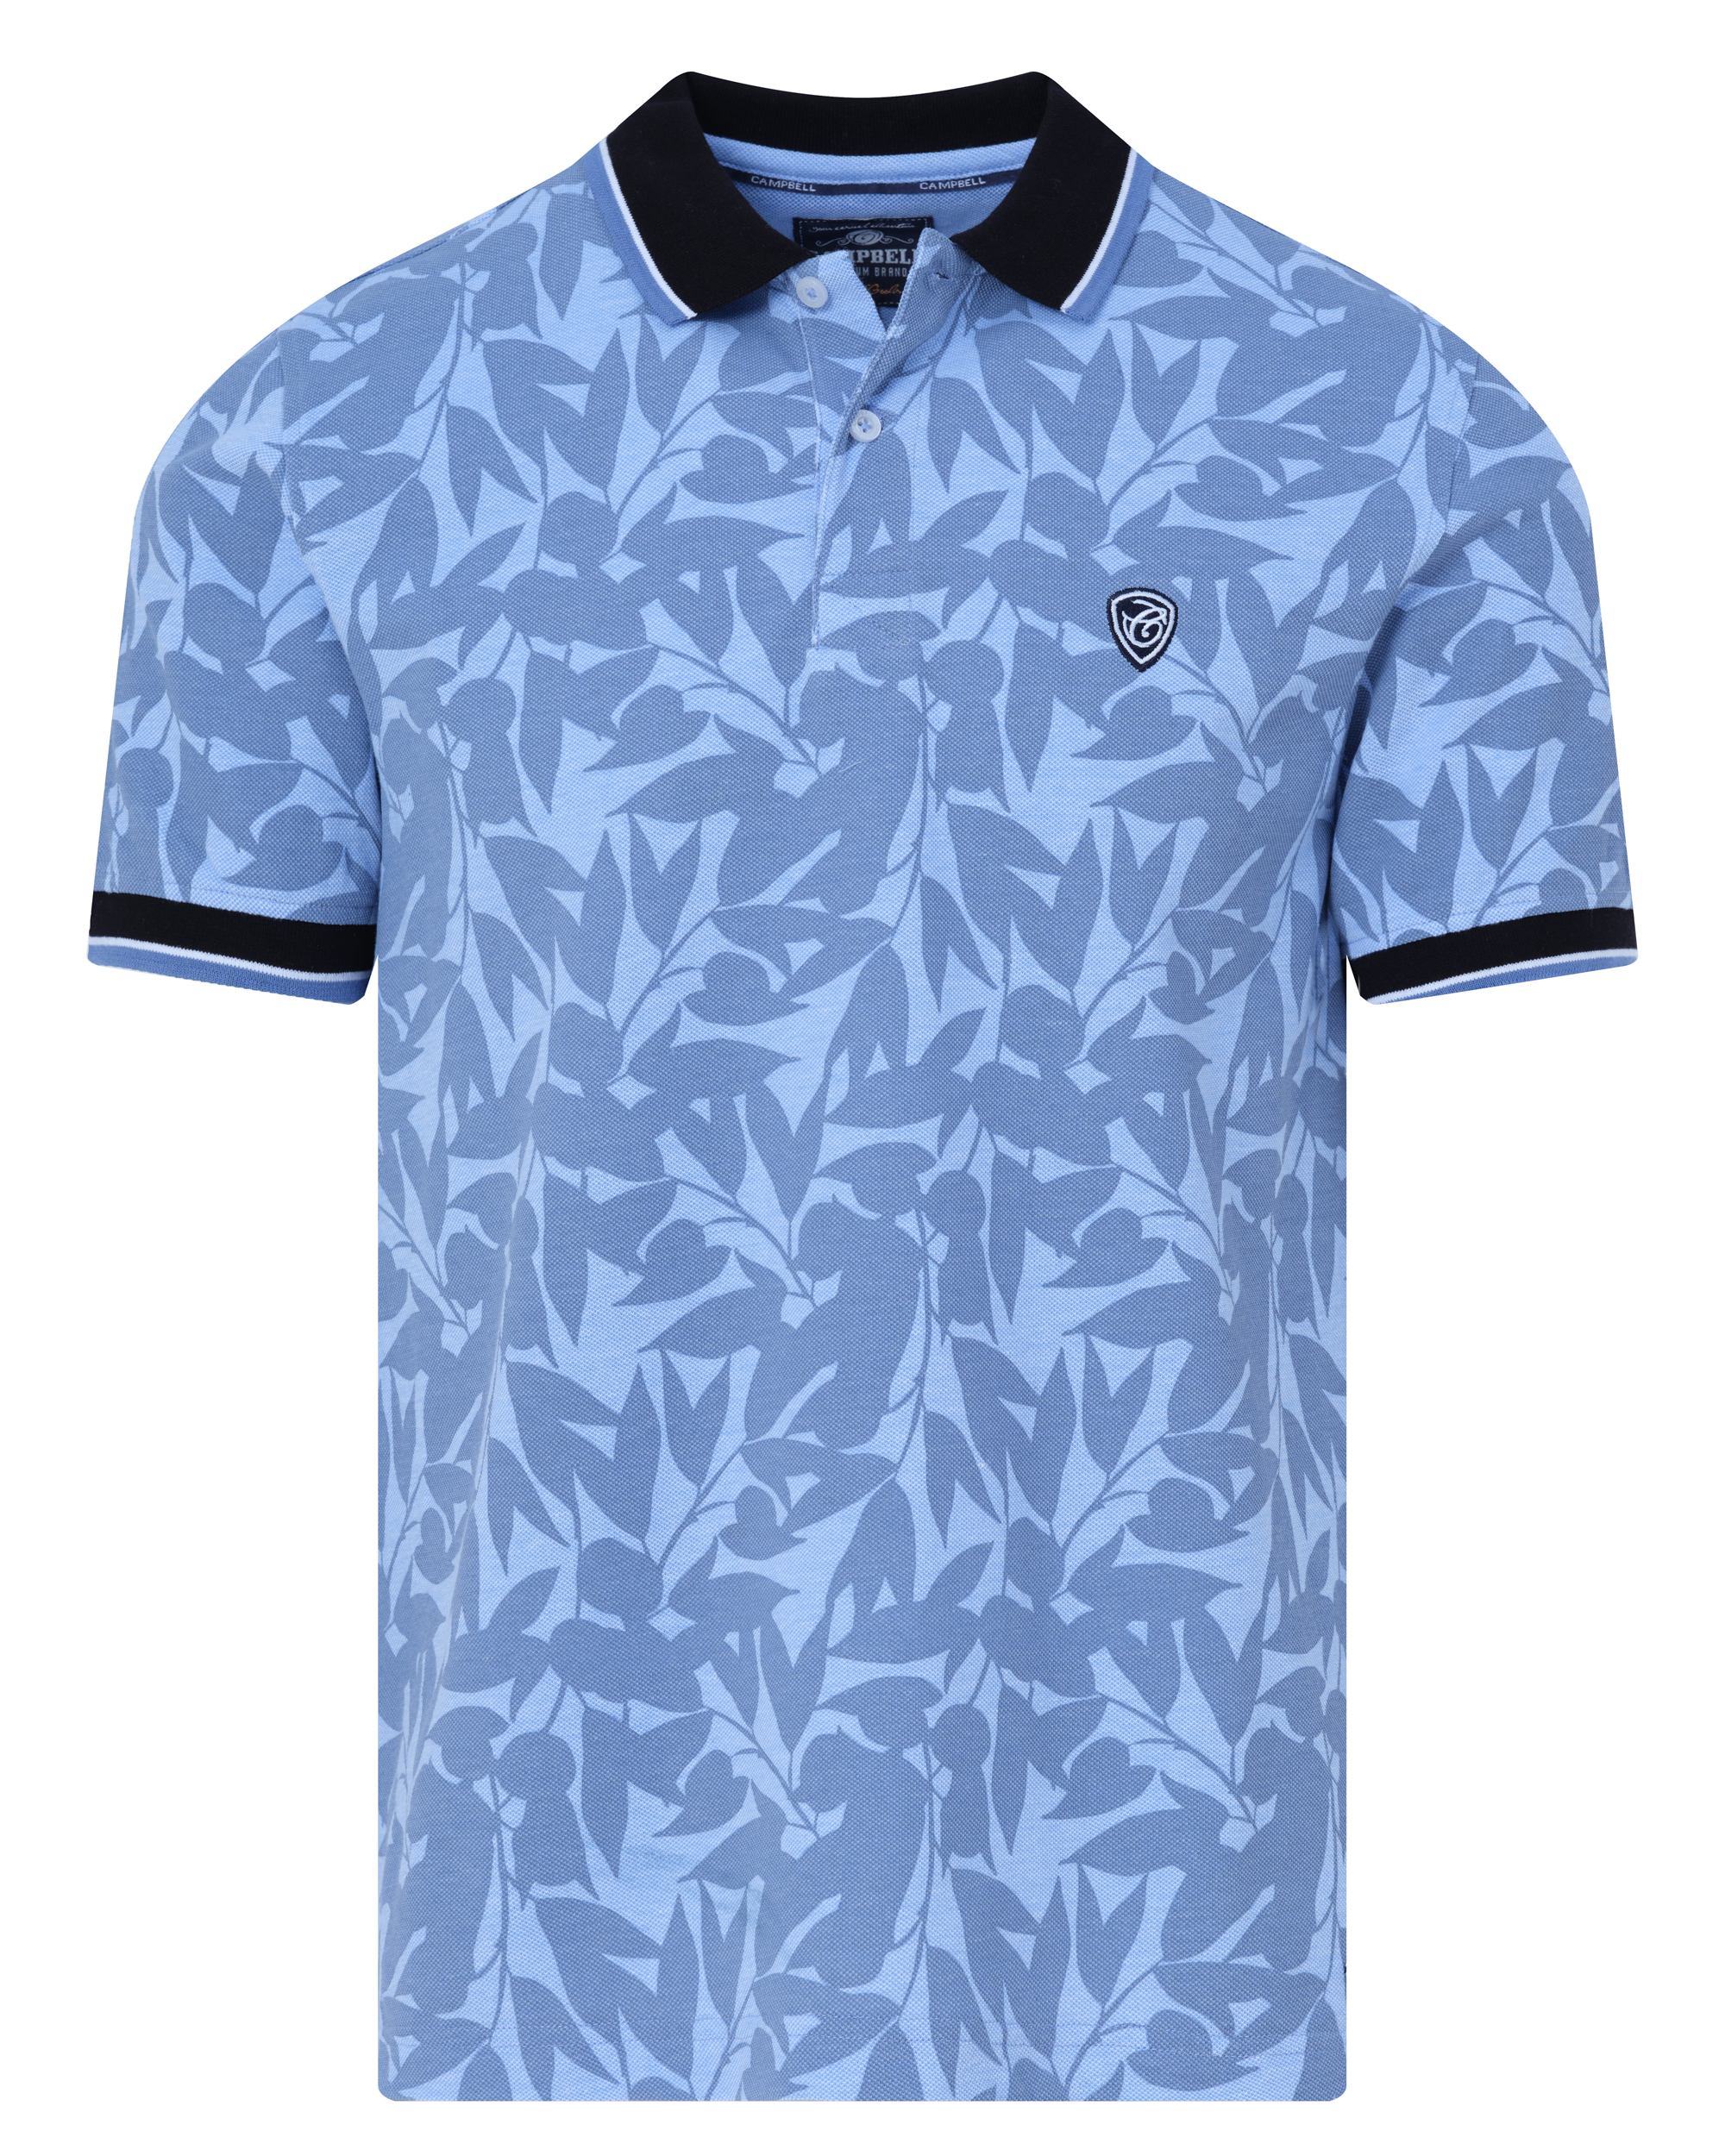 Campbell Classic - Heren Polo KM